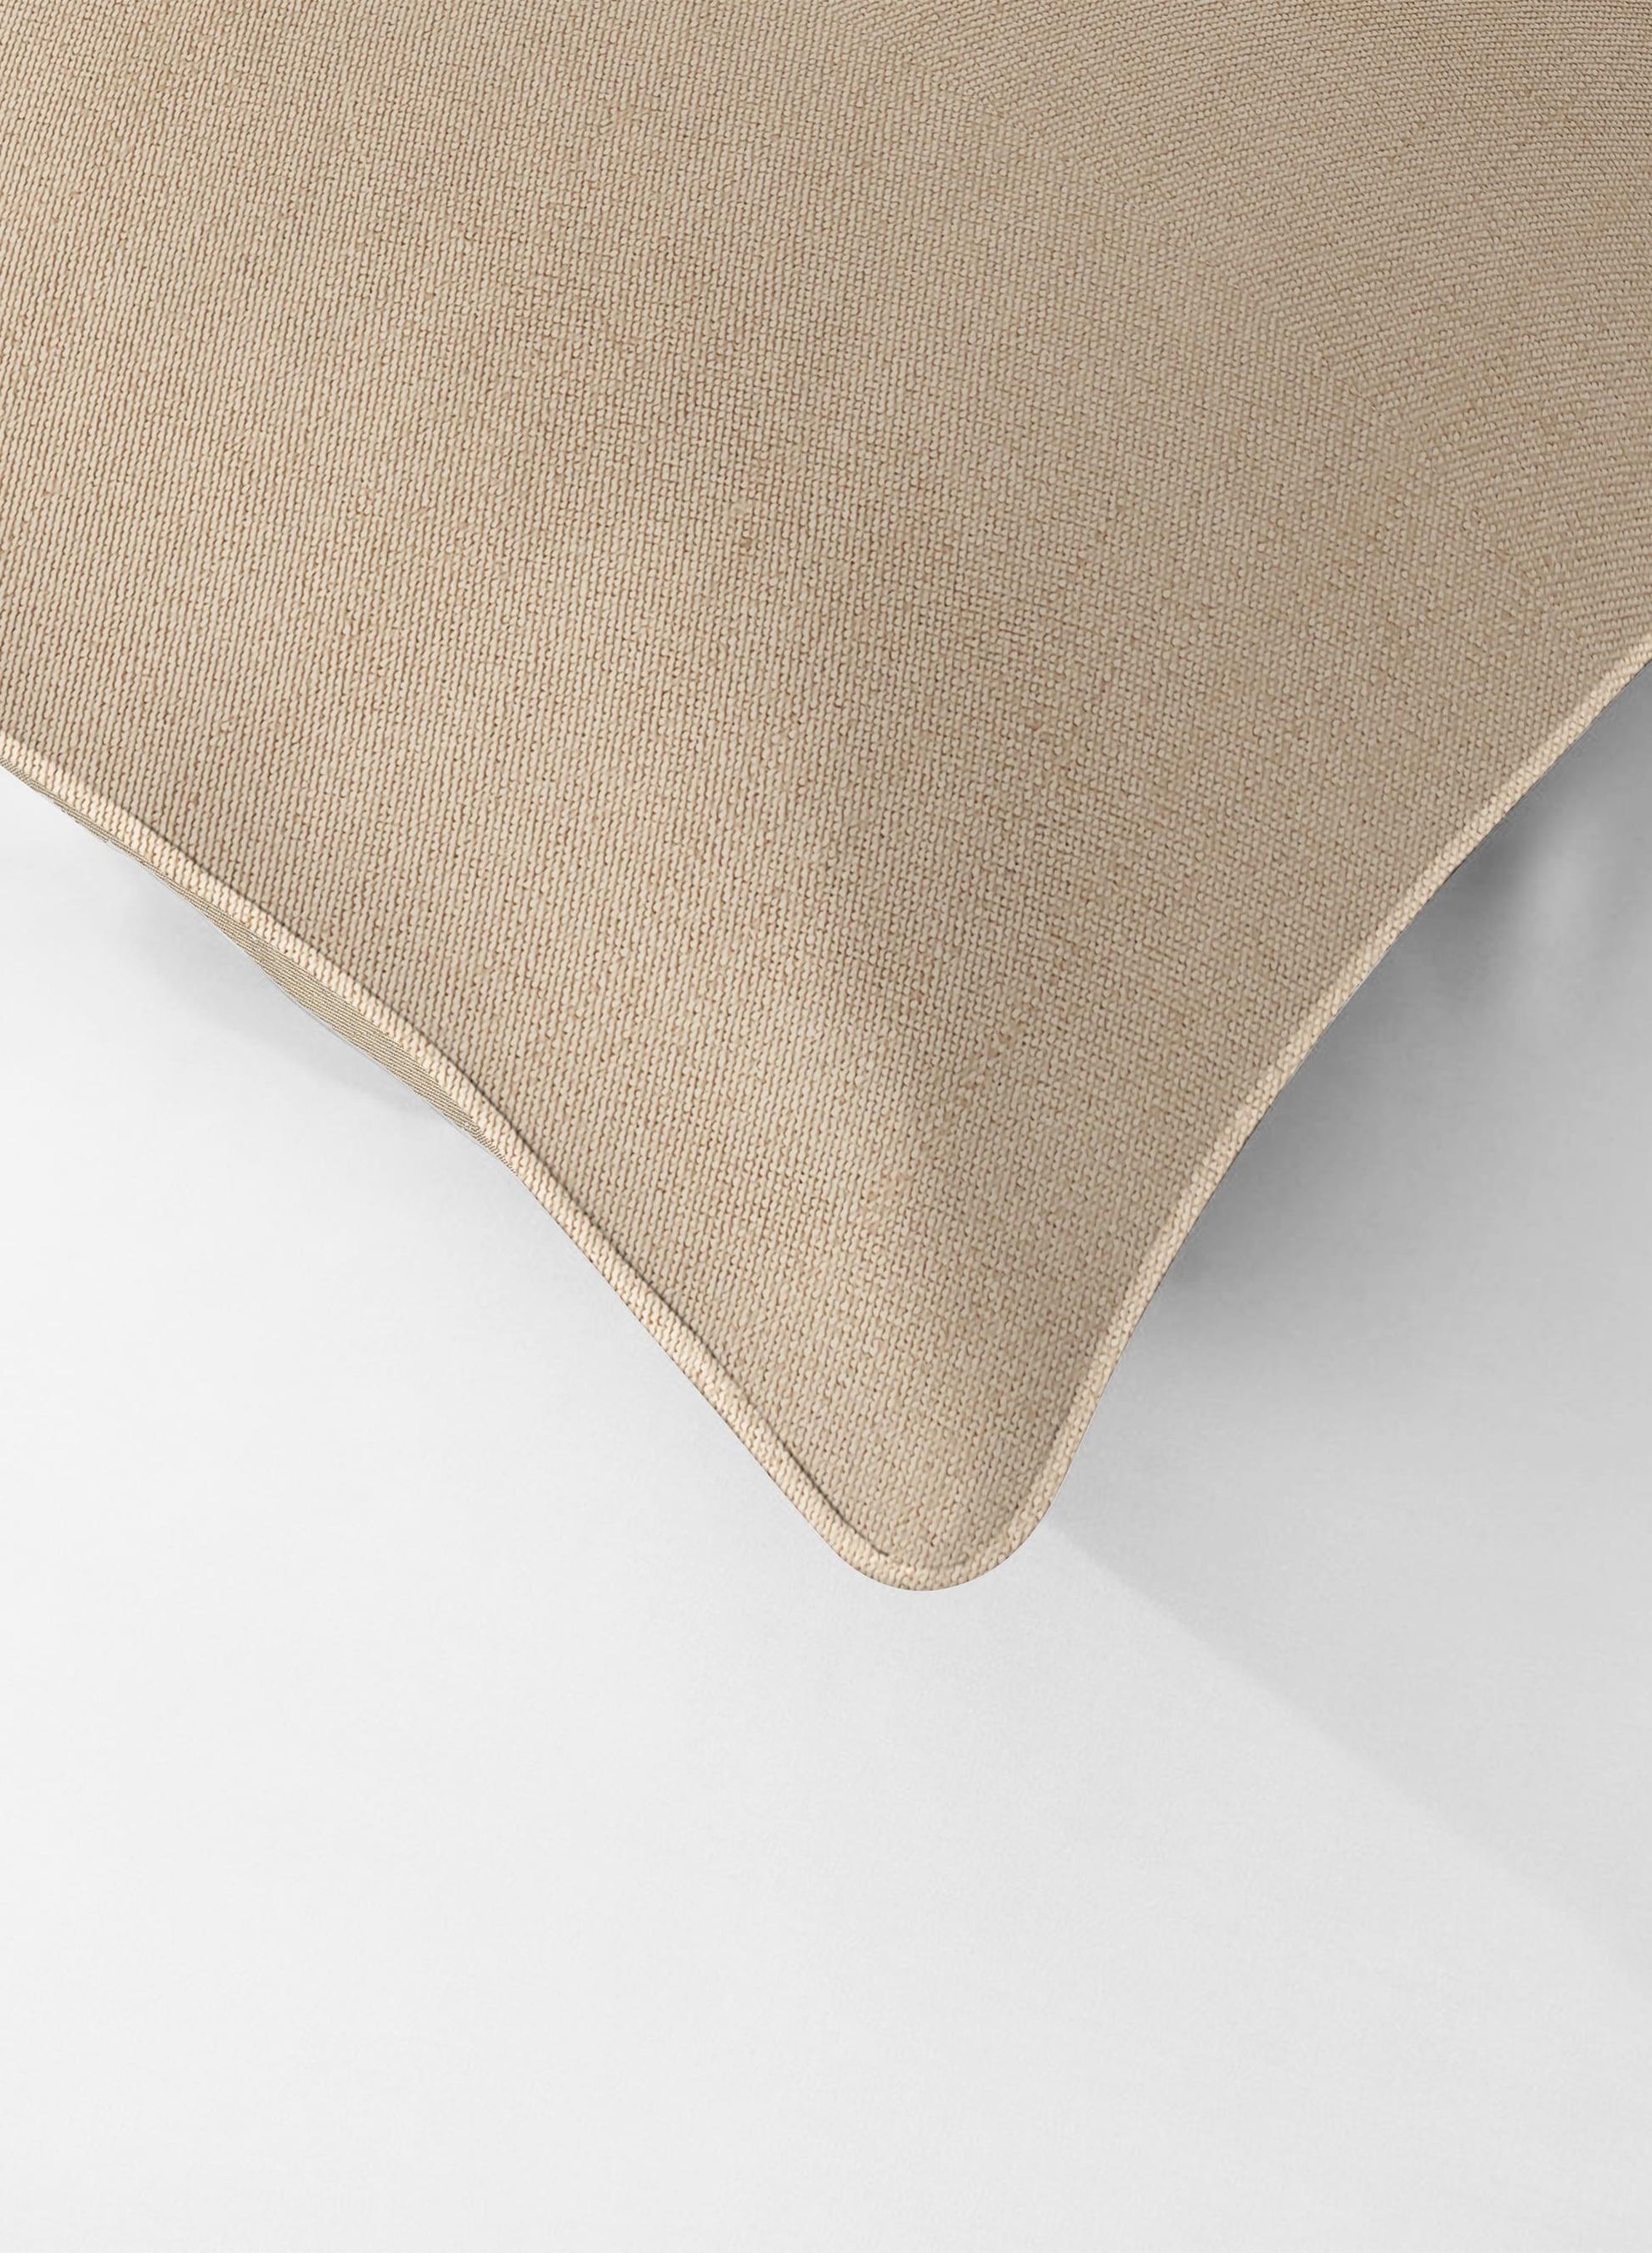 Lyon Cushion Cover | Camel - Home Crayonss